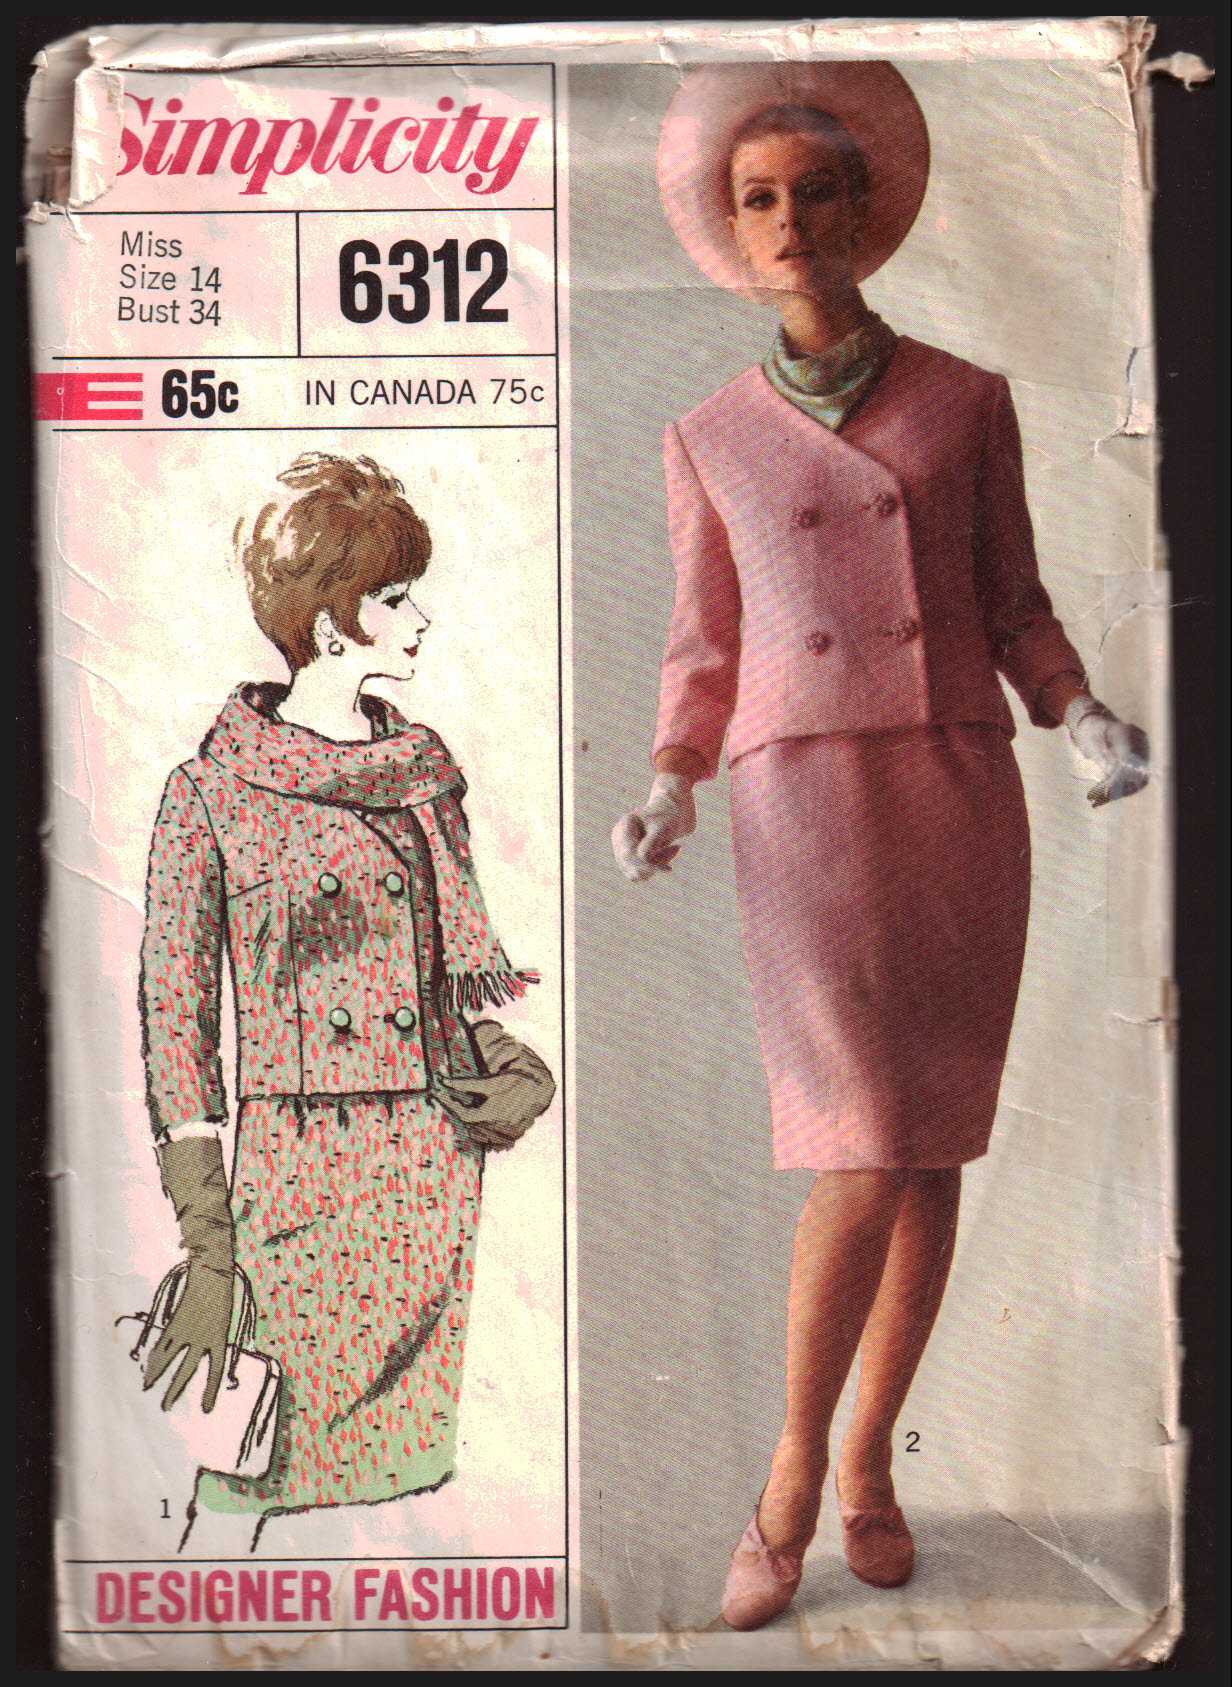 Amazon.com: Simplicity 7498 Vintage Sewing Pattern Full Figure Bathing Suit  Wrap Skirt Jacket, Check Listings for Size : Arts, Crafts & Sewing